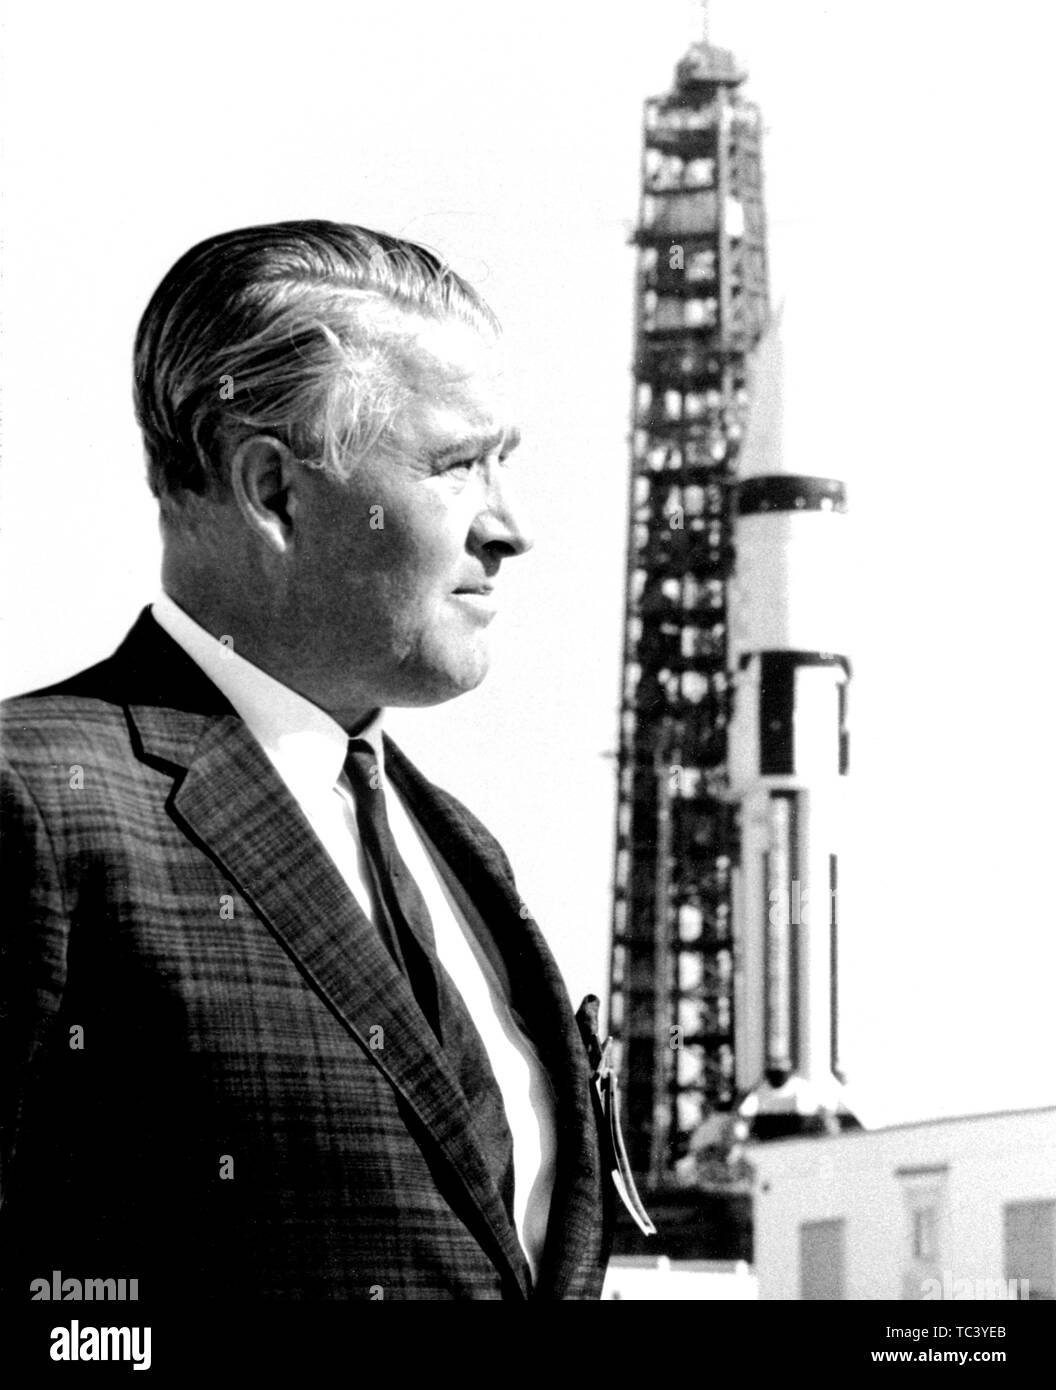 Dr Wernher von Braun stands in front of a Saturn IB launch vehicle at John F Kennedy Space Center, Merritt Island, Florida, 1968. Image courtesy National Aeronautics and Space Administration (NASA). () Stock Photo